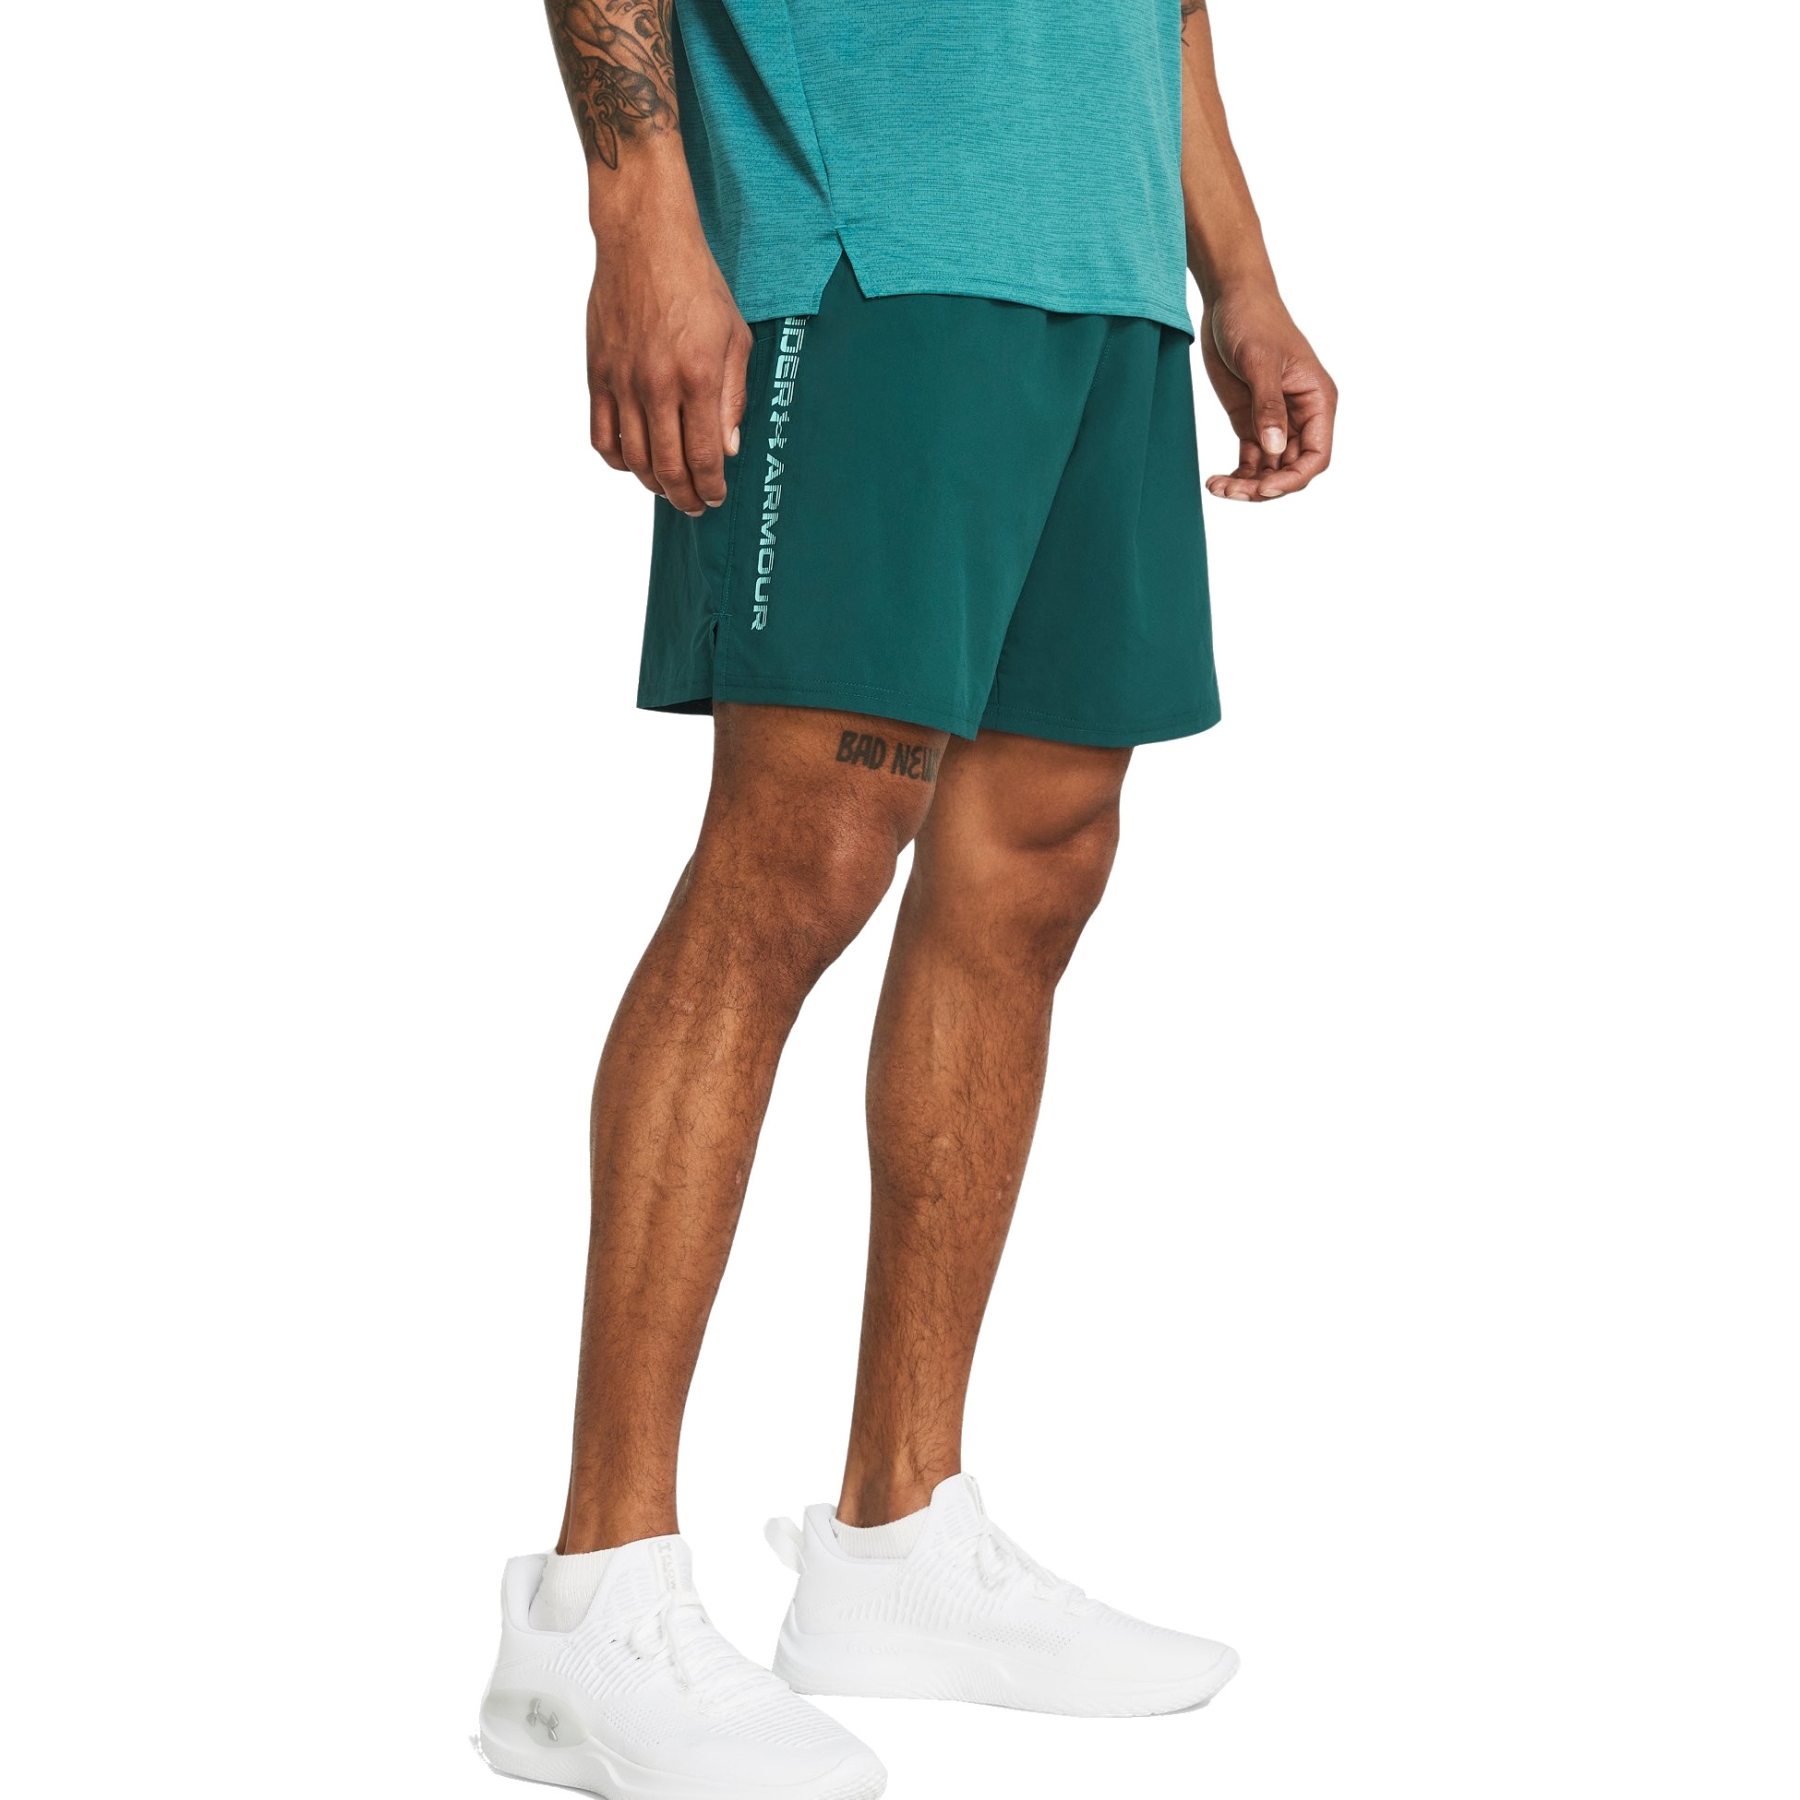 Under Armour Volleyball Shorts - Teal